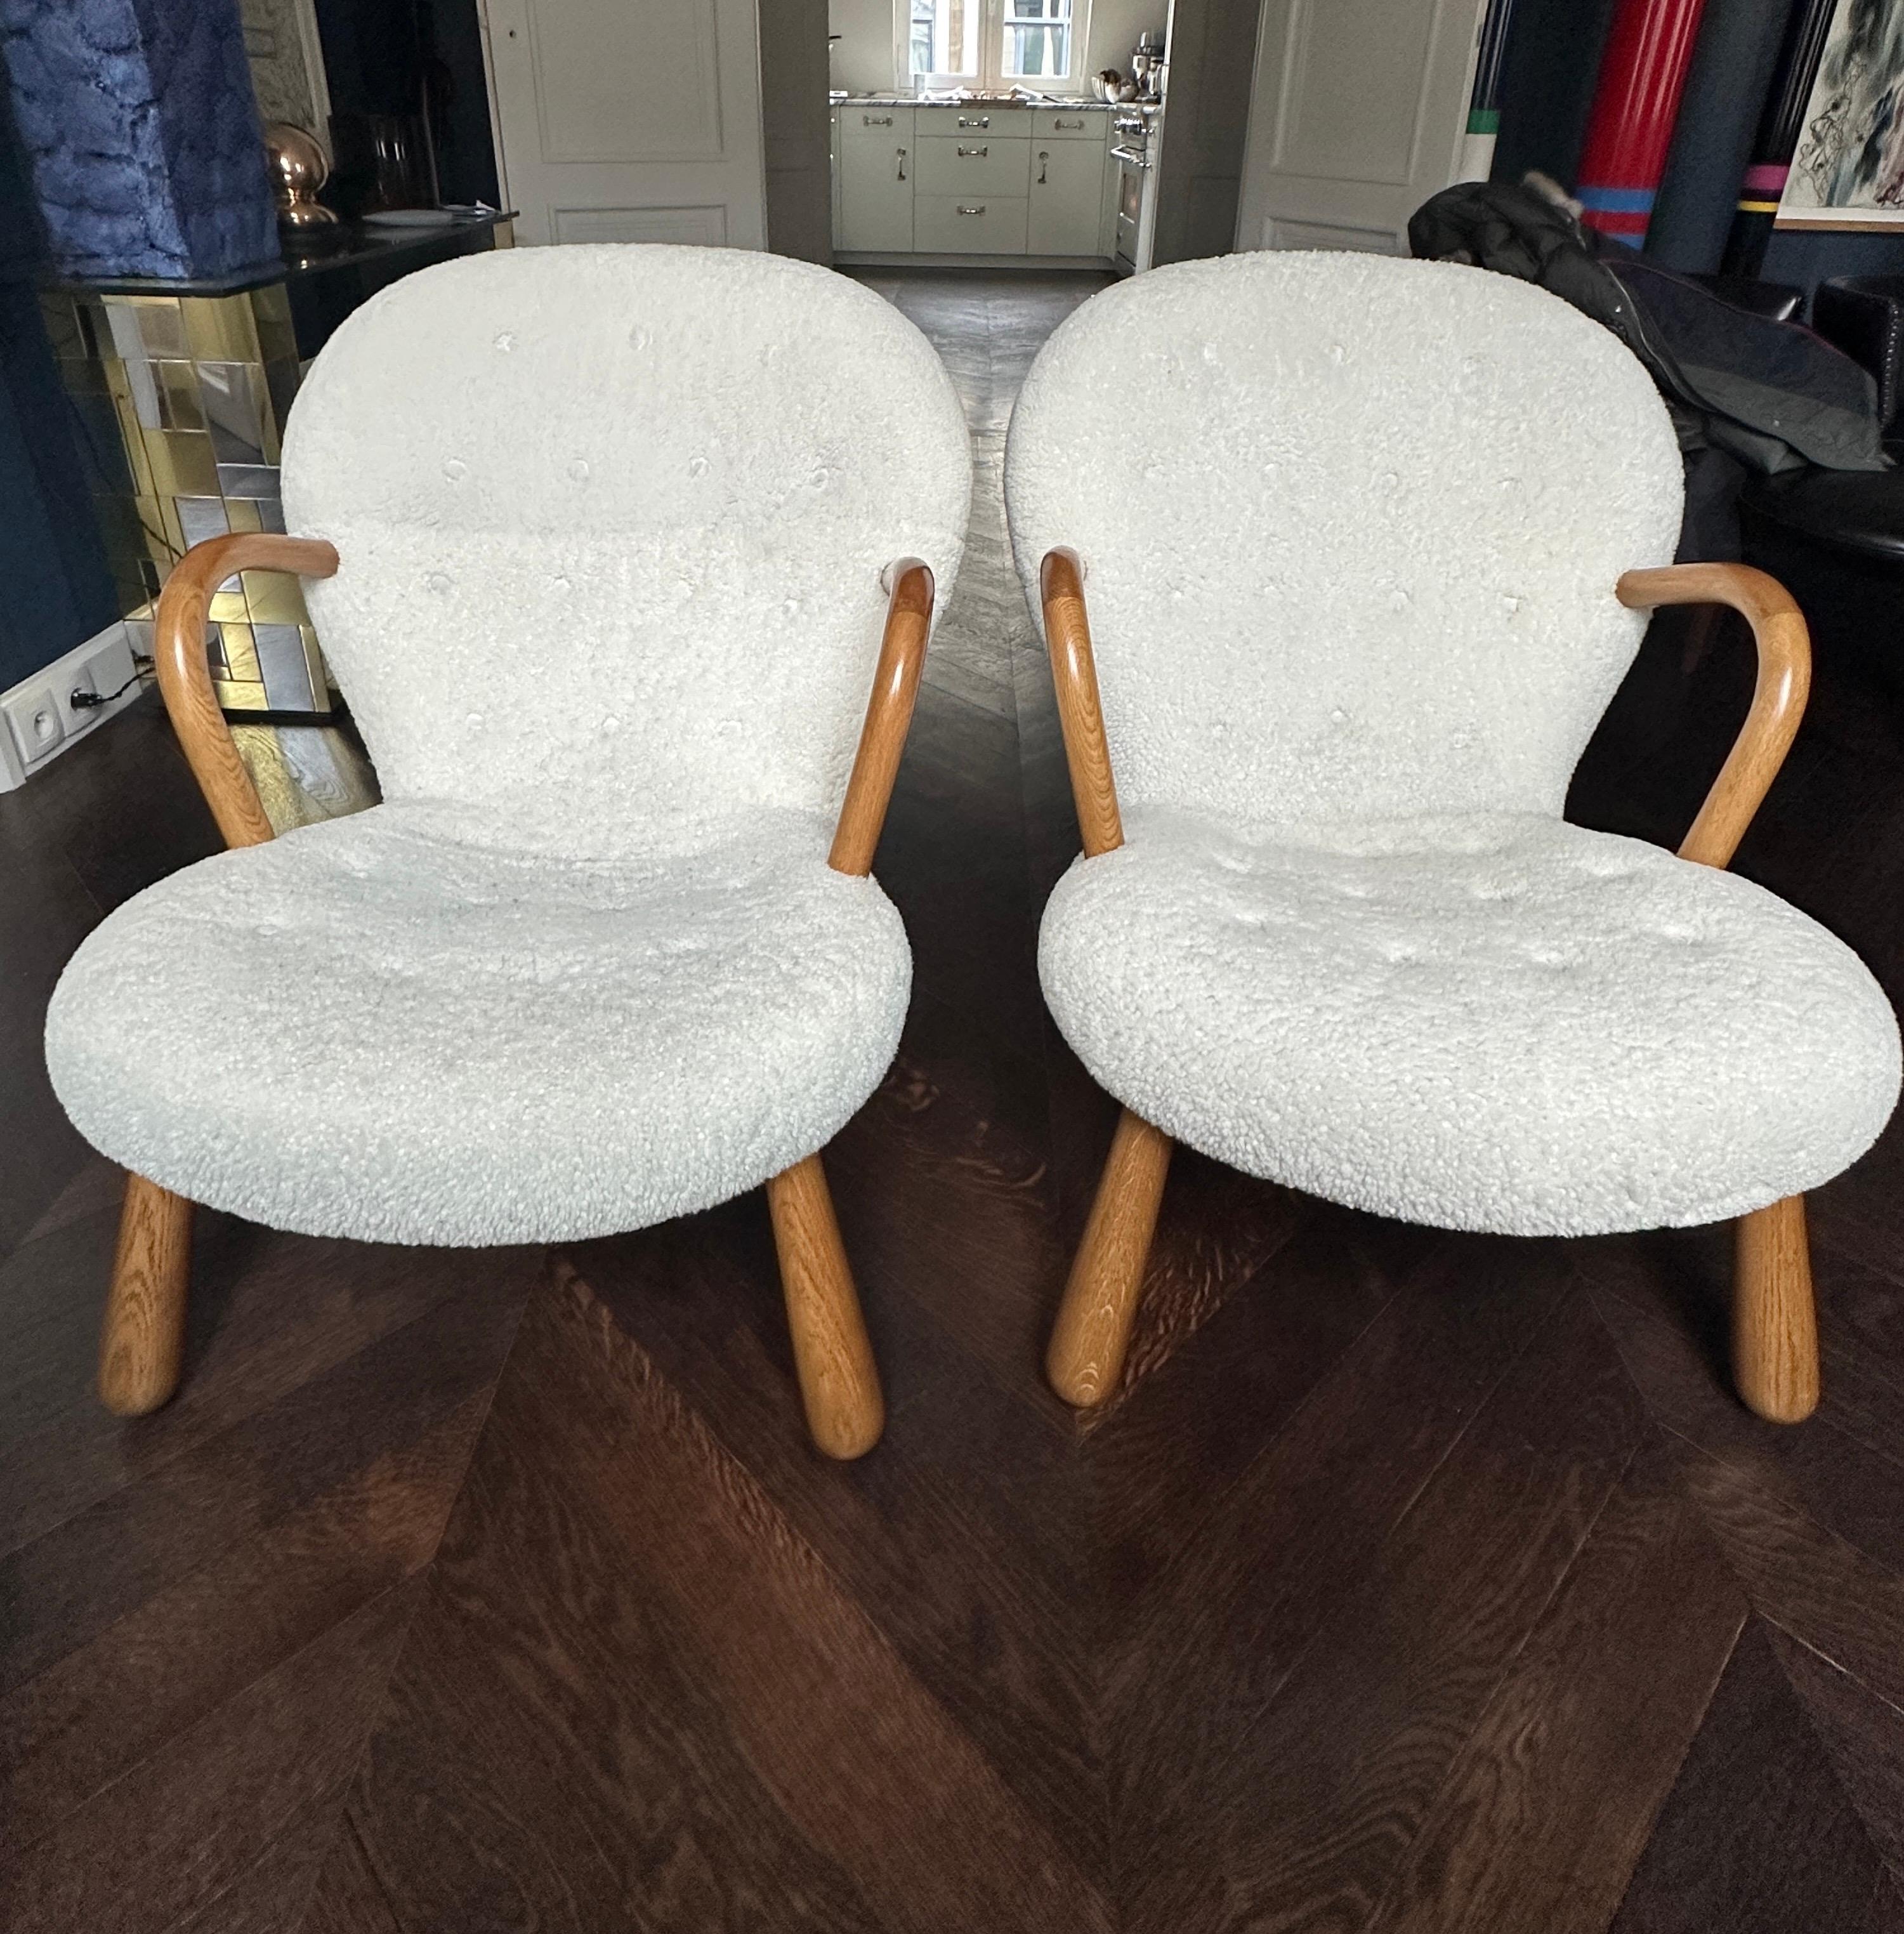 A pair of « Clam » chair in the style of Philip Arctander or Arnold Madsen. Made with Oak and covered lamb skin. The model is similar to Arnold MadsenvClam chair.
Theses armchairs are very comfortable, in very good pre owned condition.
Price for 1